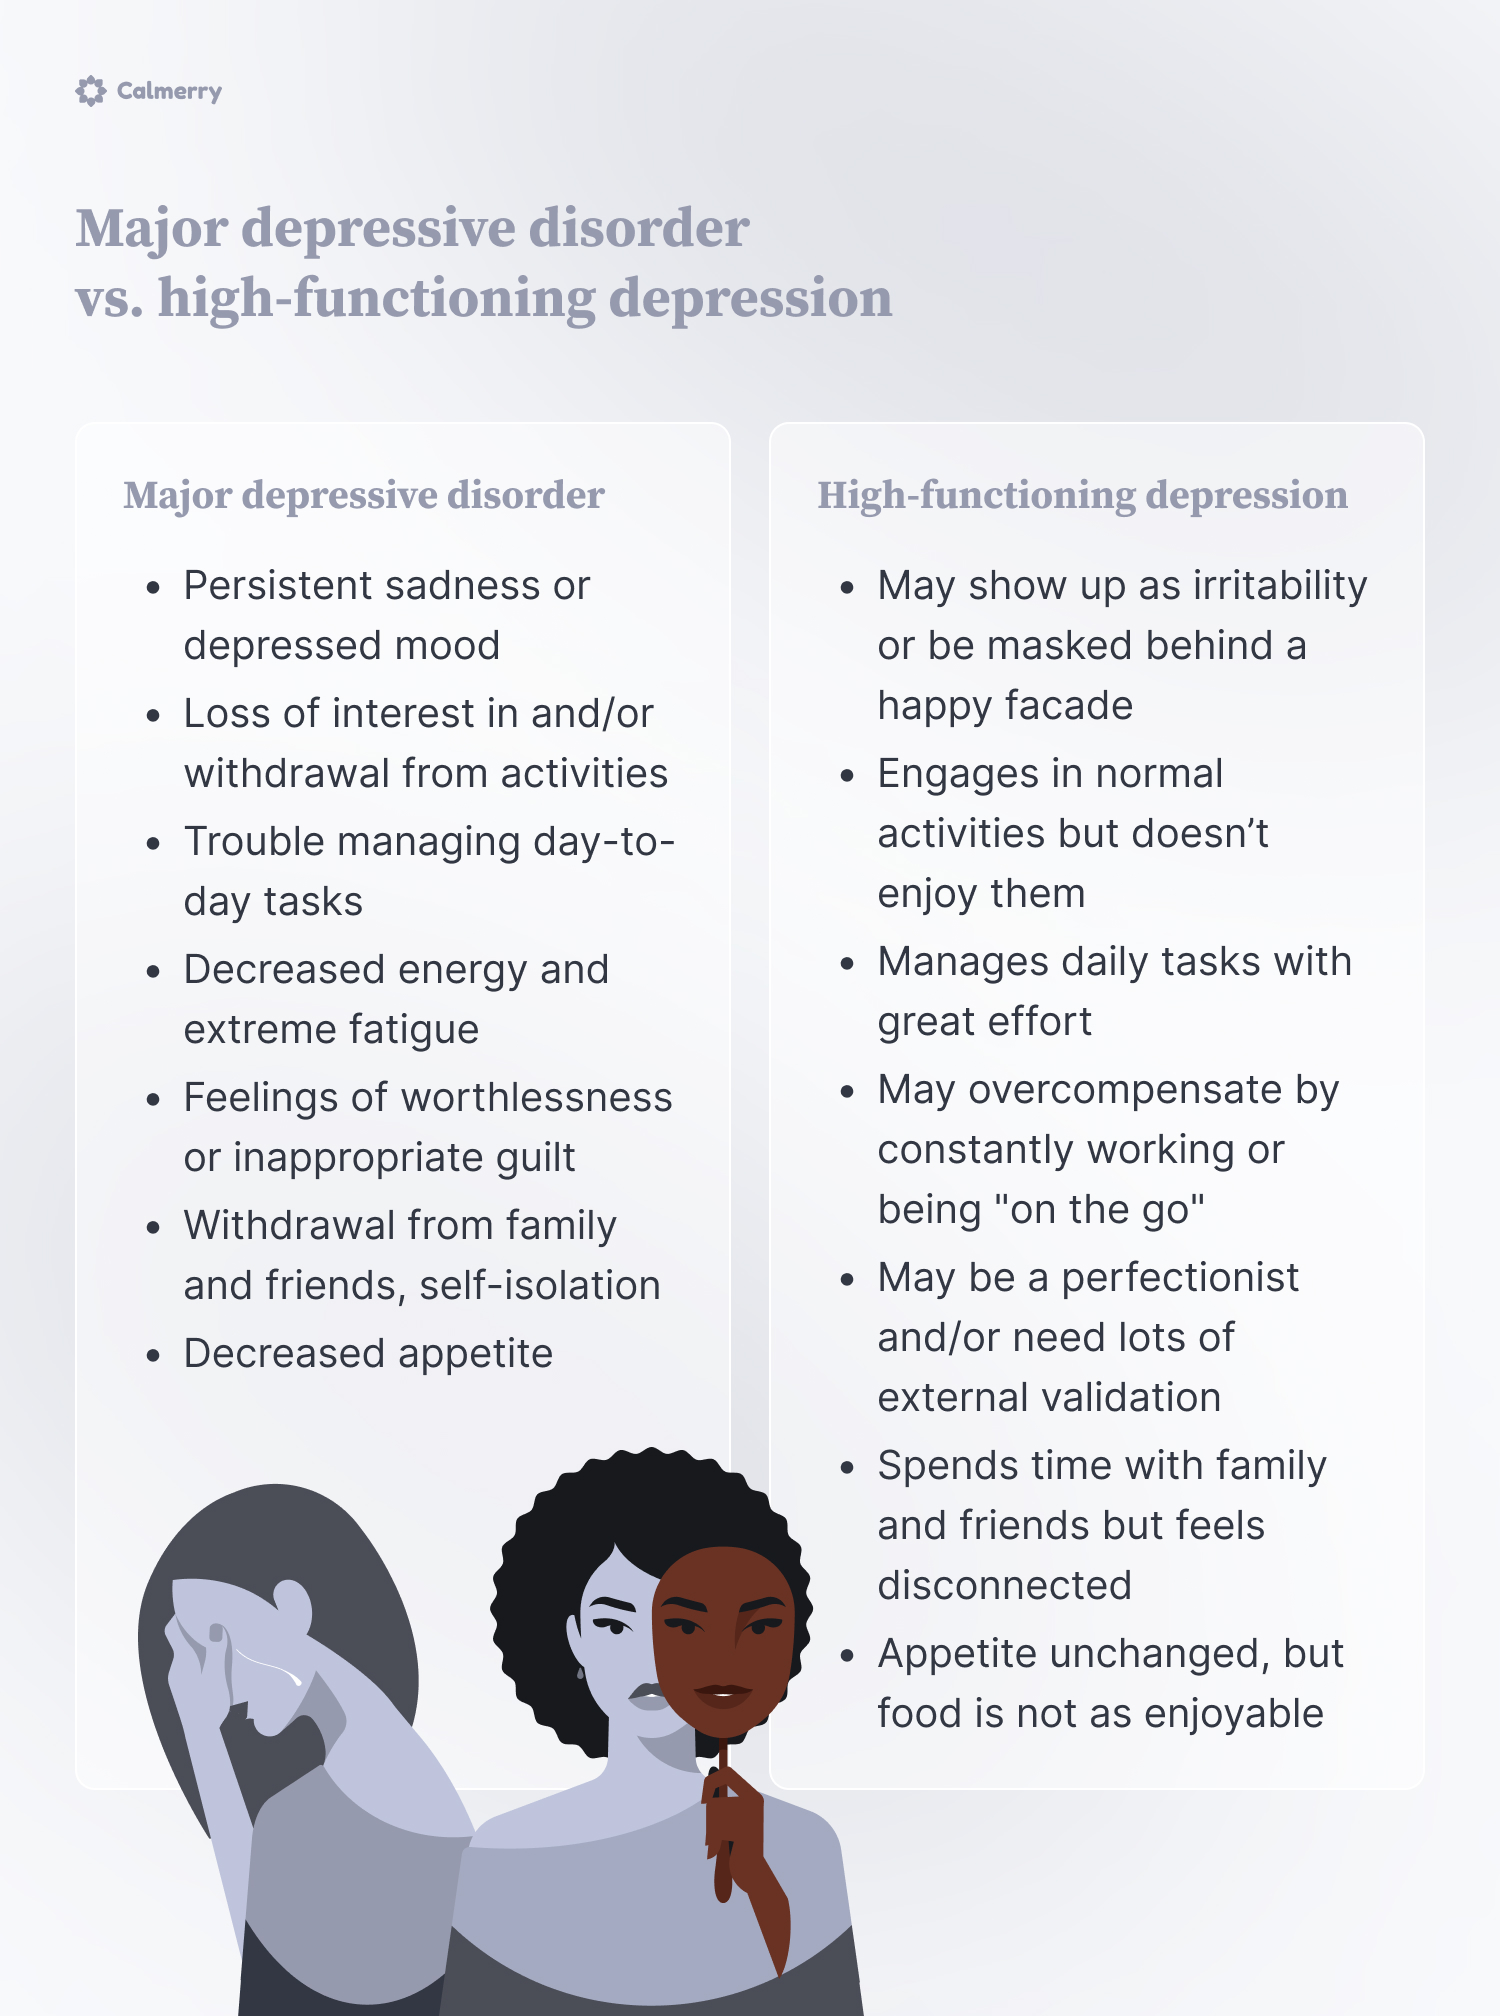 Major depressive disorder vs. high-functioning depression
Major depressive disorder
Persistent sadness or depressed mood
Loss of interest in and/or withdrawal from activities
Trouble managing day-to-day tasks
Decreased energy and extreme fatigue
Feelings of worthlessness or inappropriate guilt
Withdrawal from family and friends, self-isolation
Decreased appetite
High-functioning depression
May show up as irritability or be masked behind a happy facade
Engages in normal activities but doesn’t enjoy them
Manages daily tasks with great effort
May overcompensate by constantly working or being "on the go"
May be a perfectionist and/or need lots of external validation
Spends time with family and friends but feels disconnected
Appetite unchanged, but food is not as enjoyable